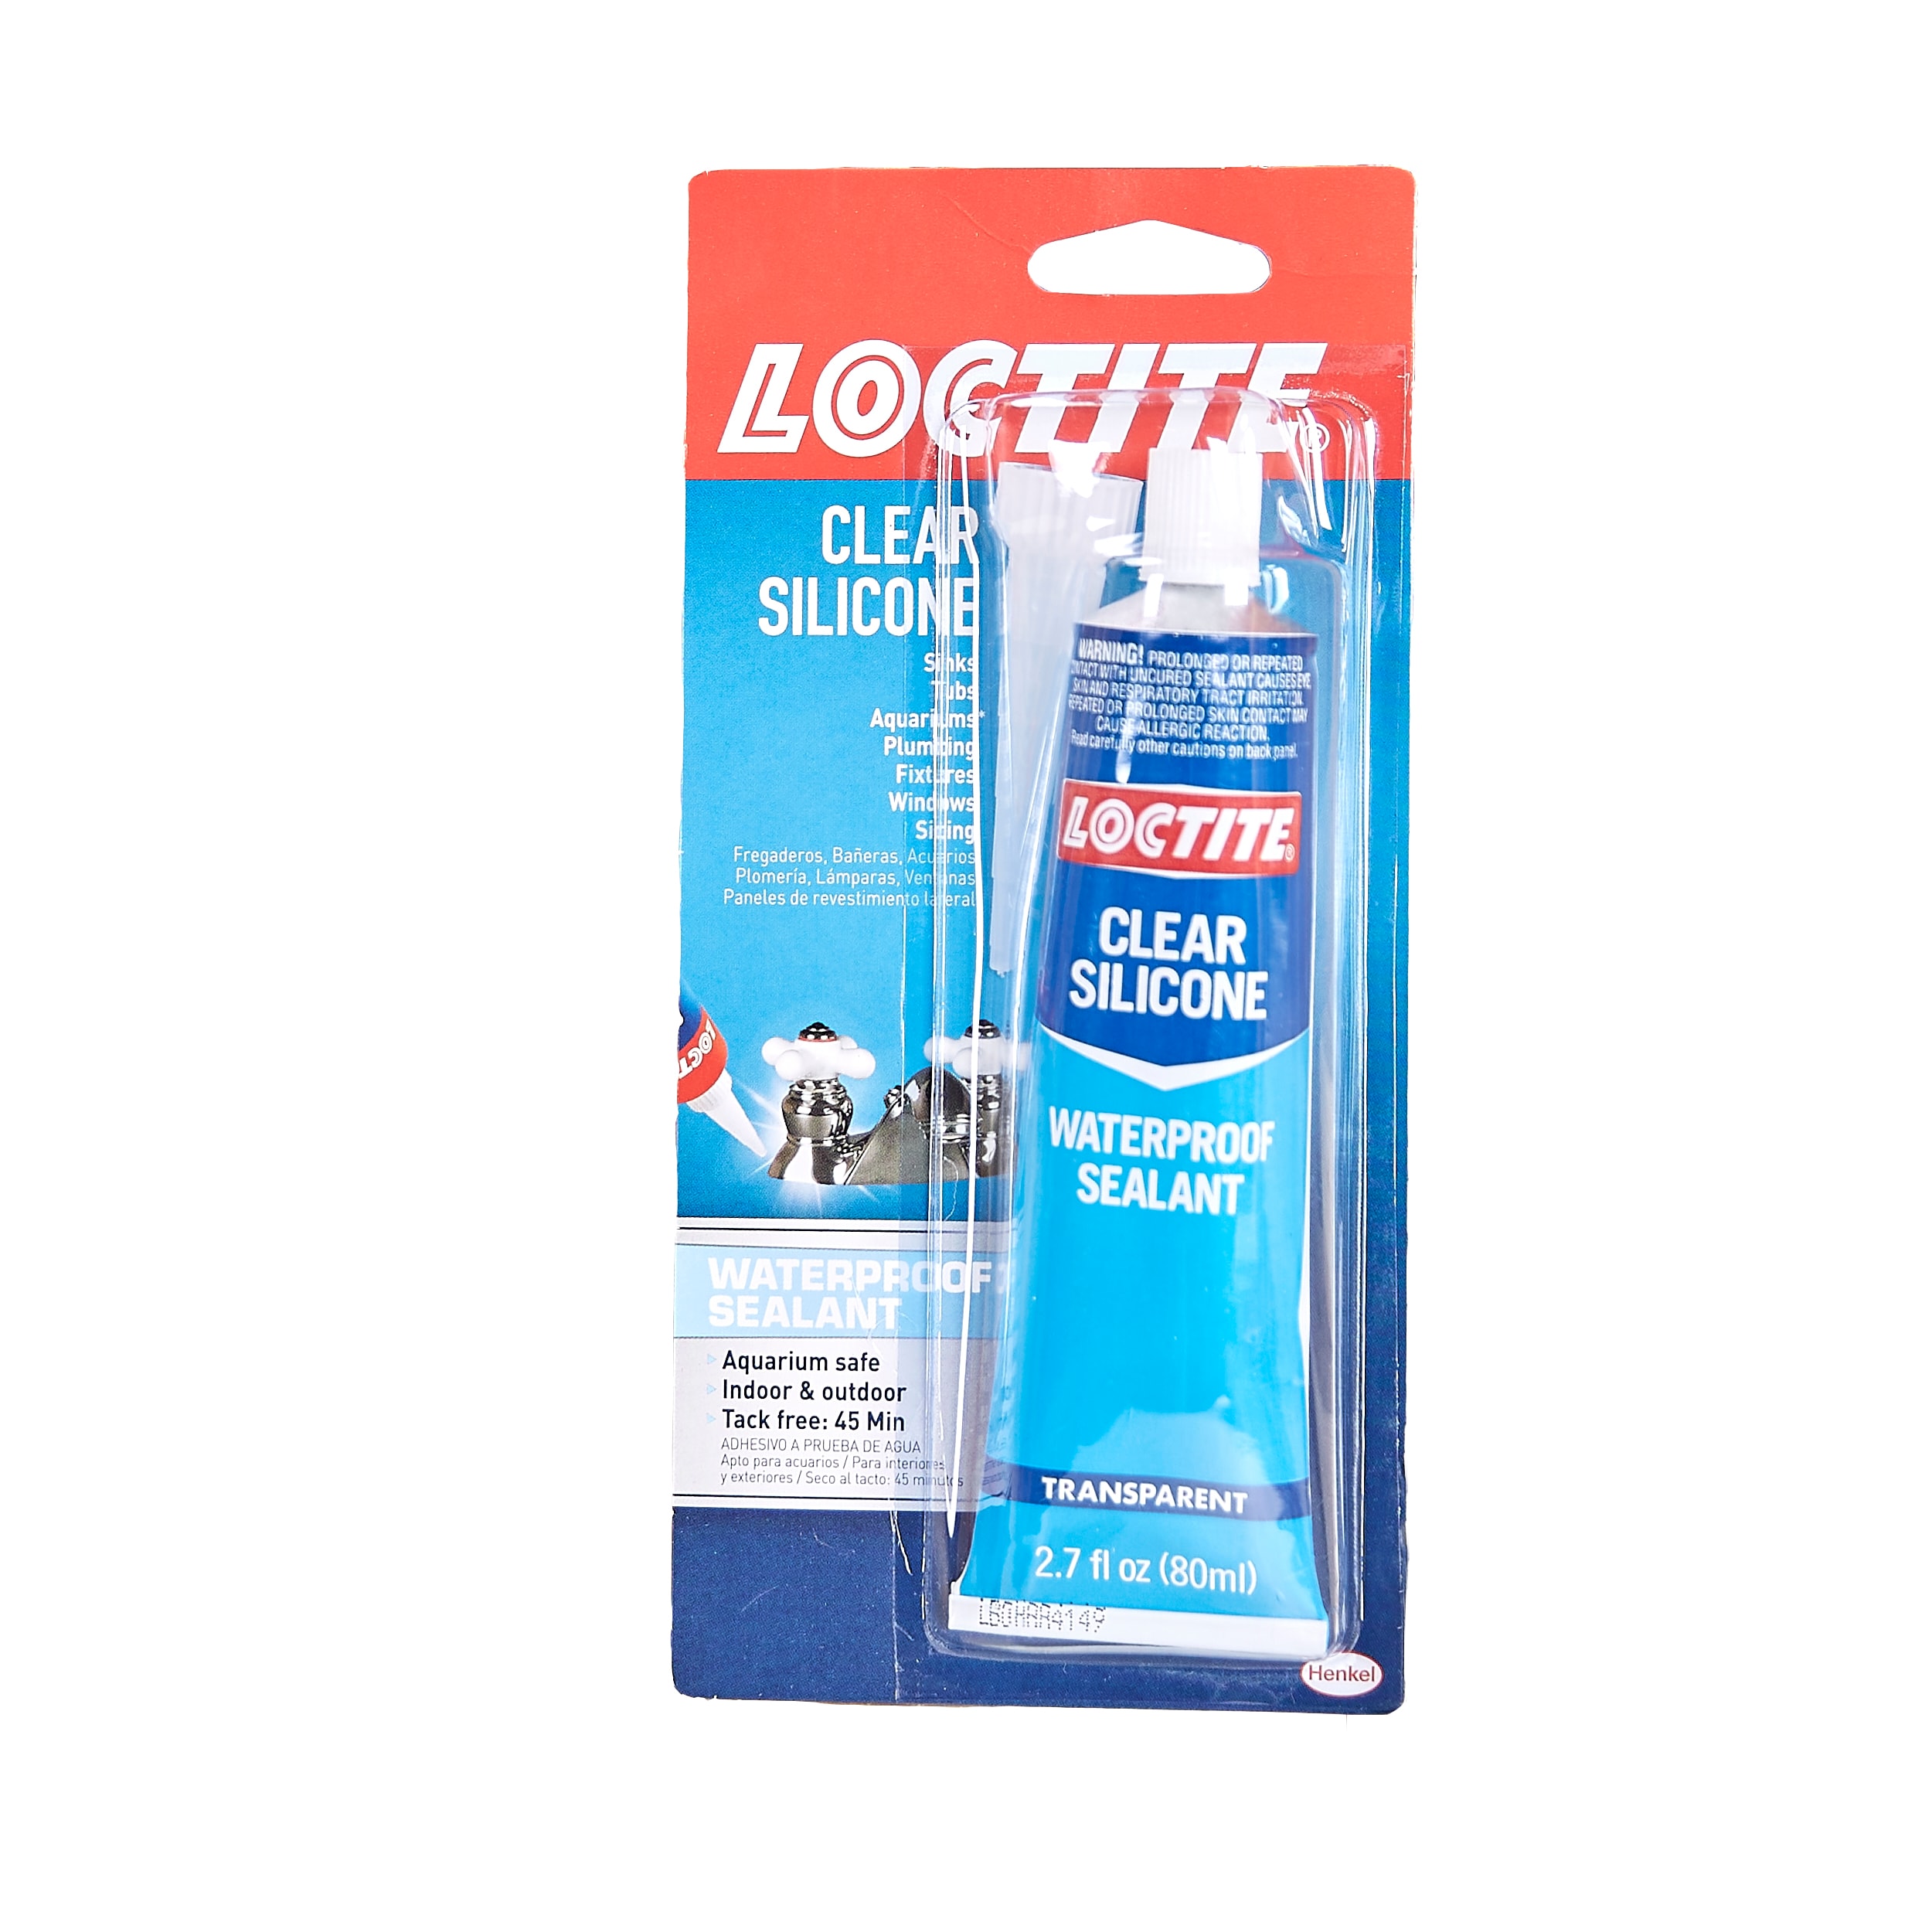 Loctite Clear Silicone Waterproof Sealant 2.7-Ounce Tube (3 Pack)